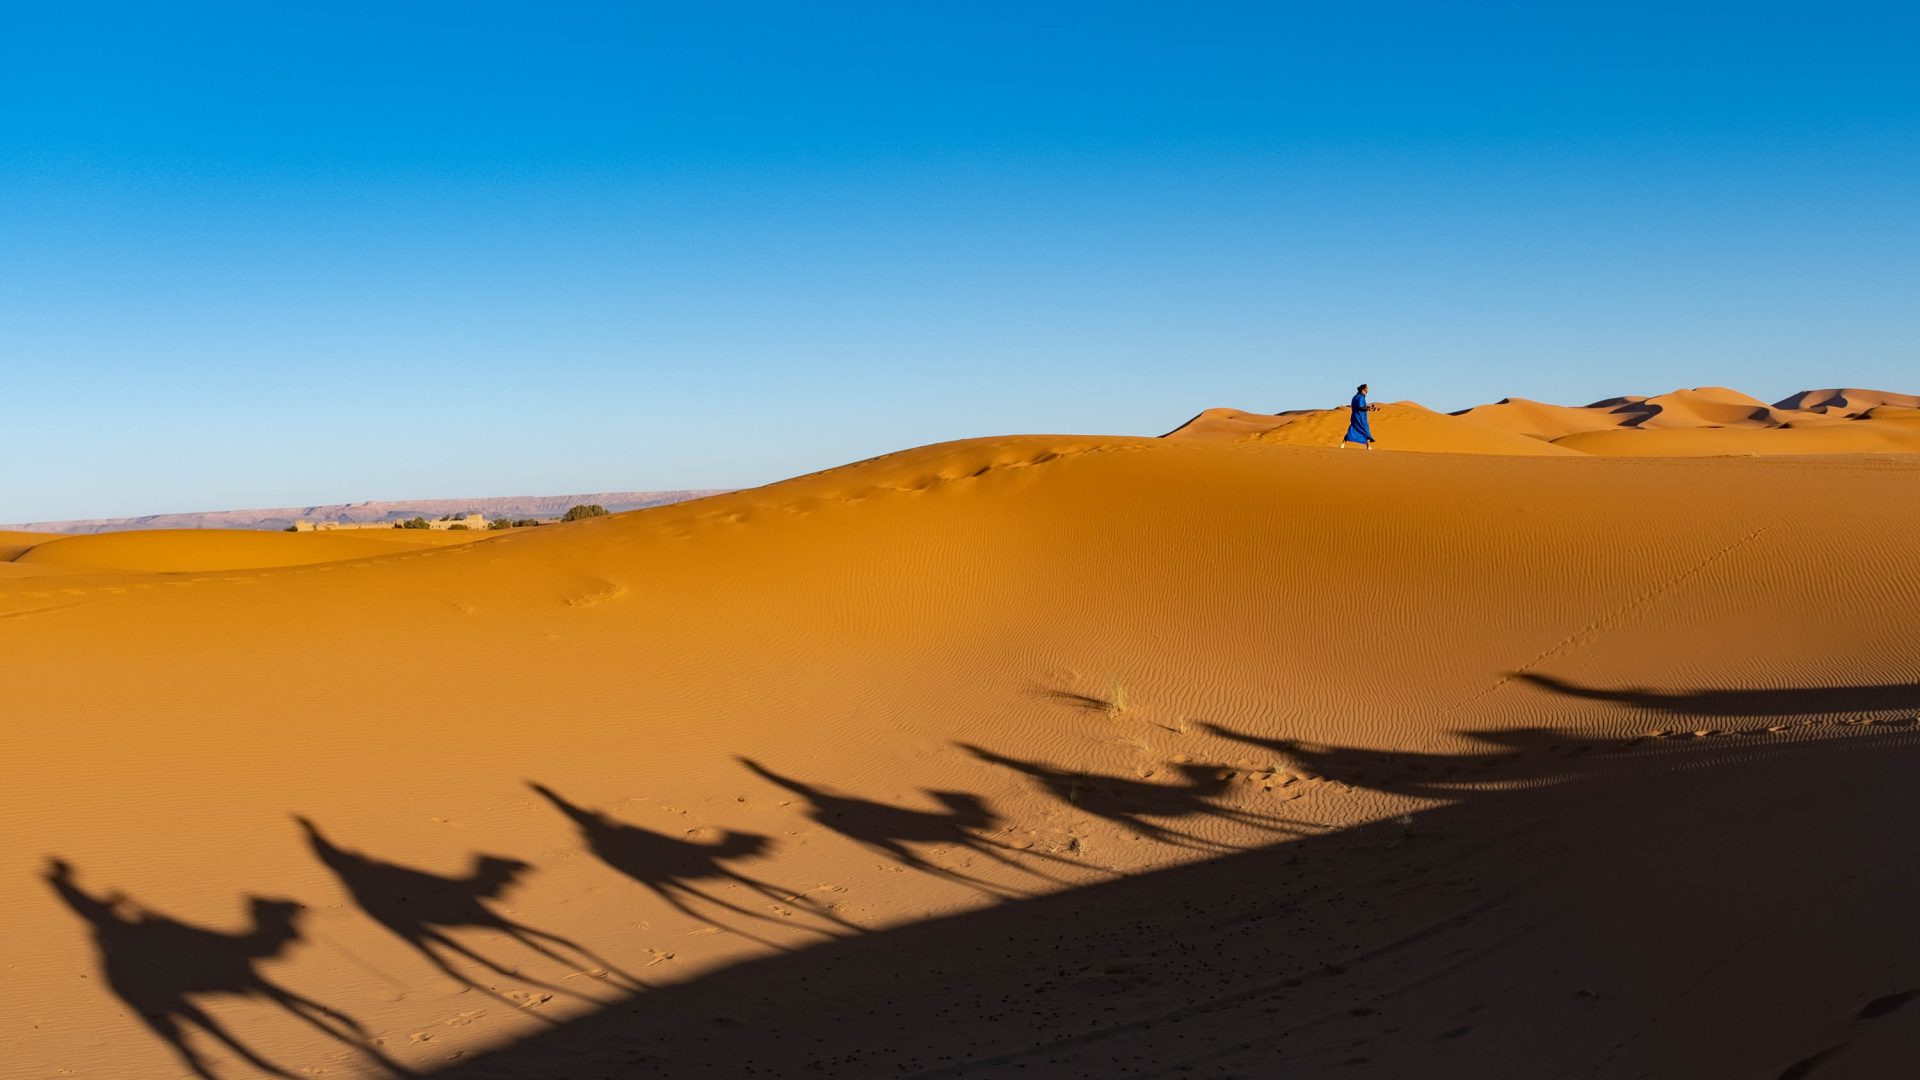 A man walks through the desert while camels are silhouetted on the sand.